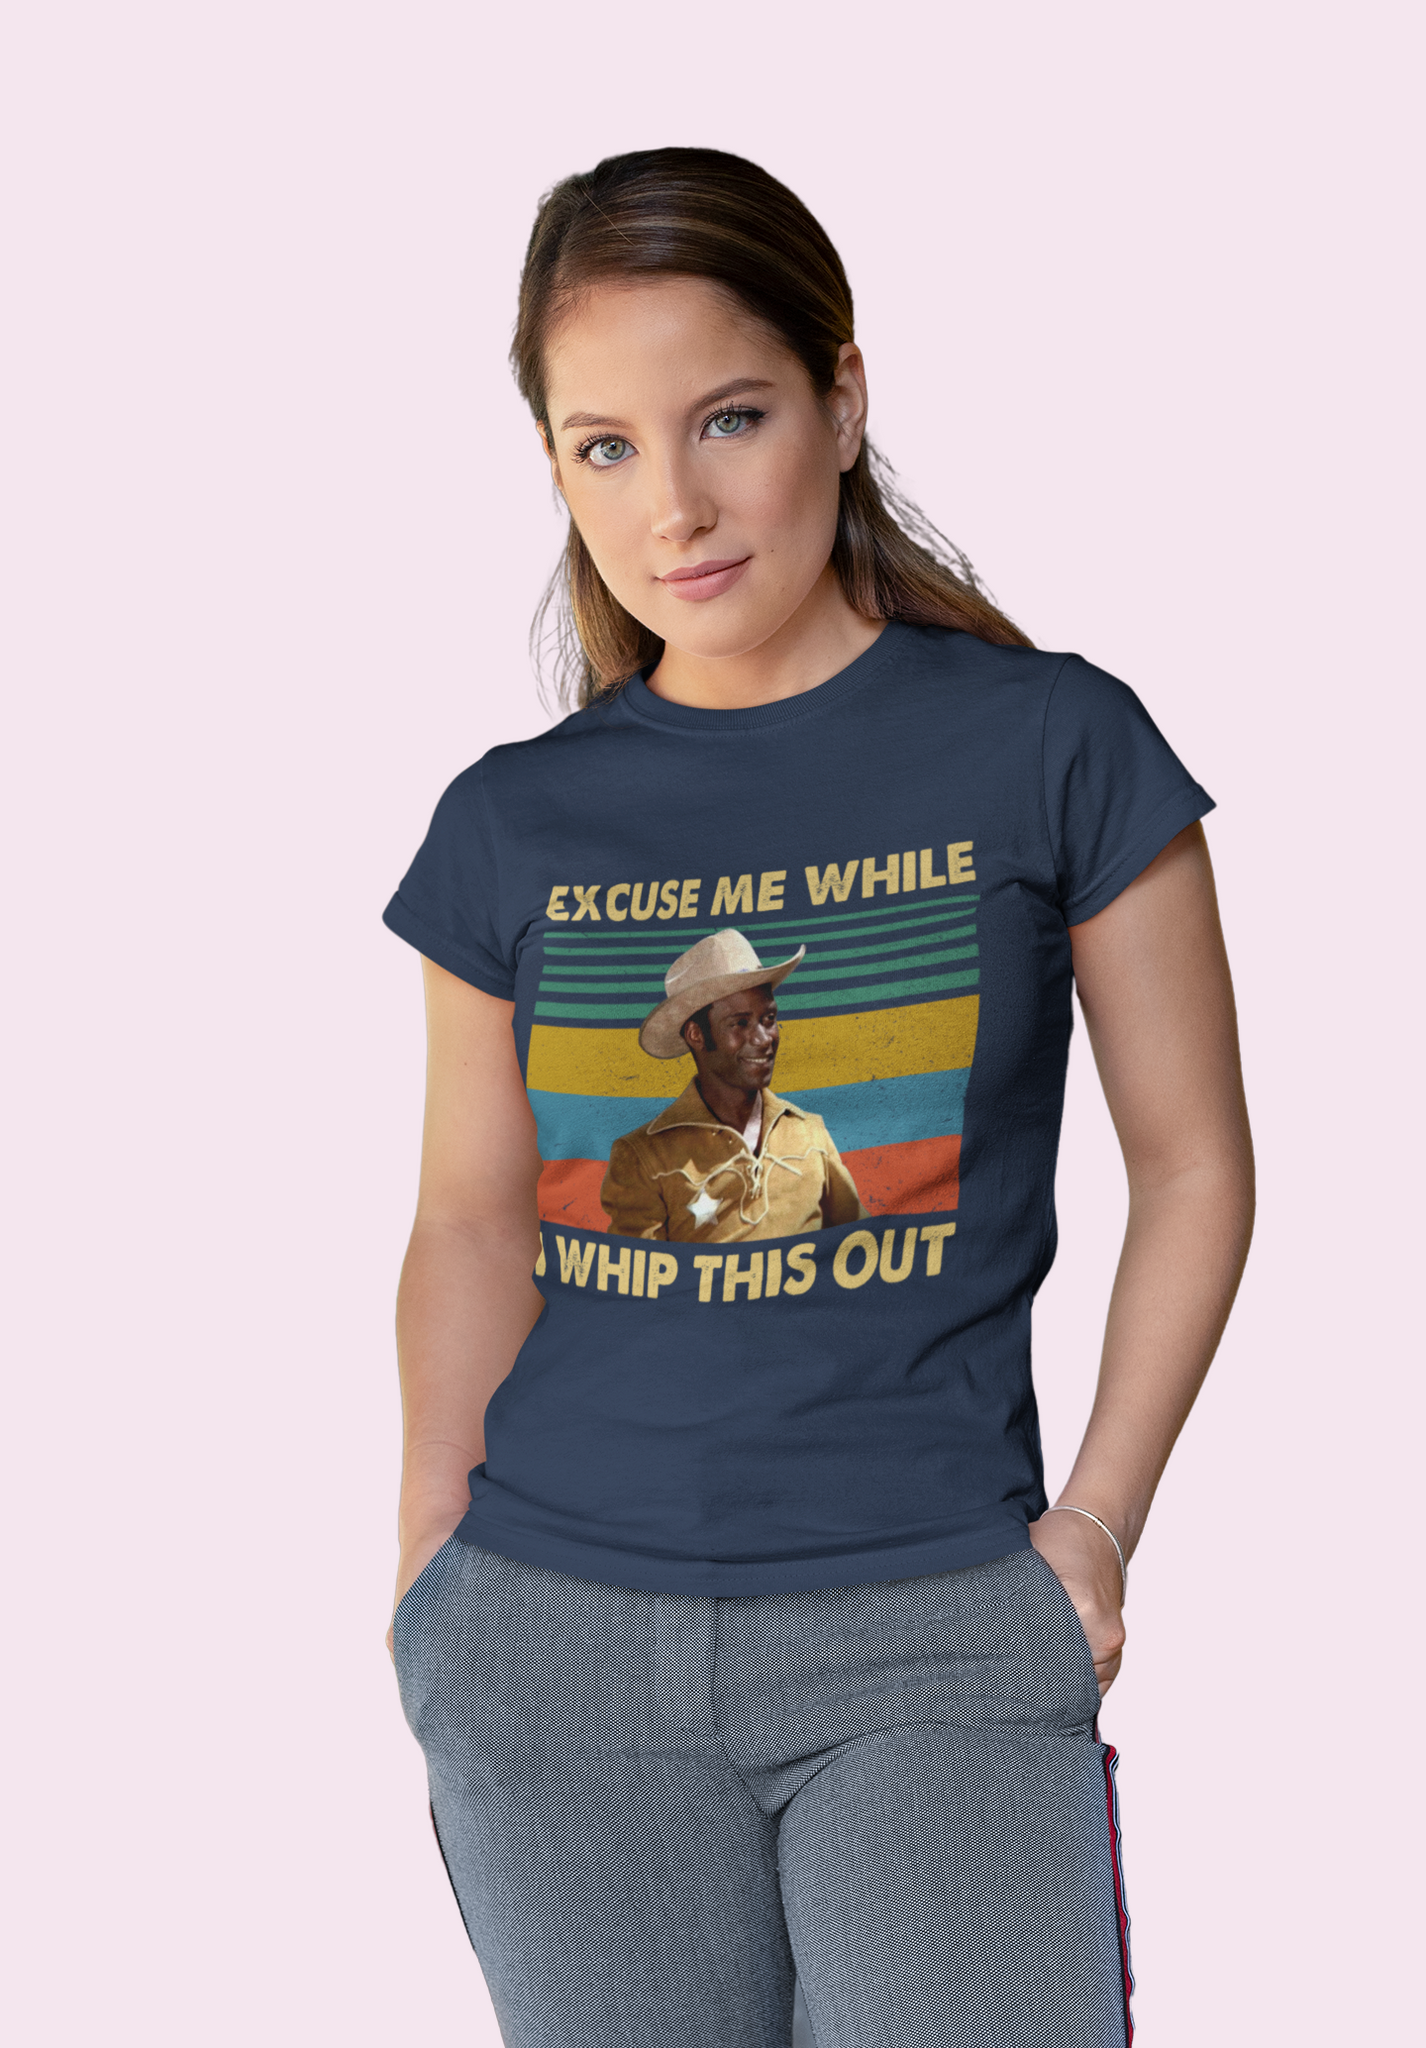 Blazing Saddles Movie T Shirt, Bart T Shirt, Excuse Me While I Whip This Out Tshirt